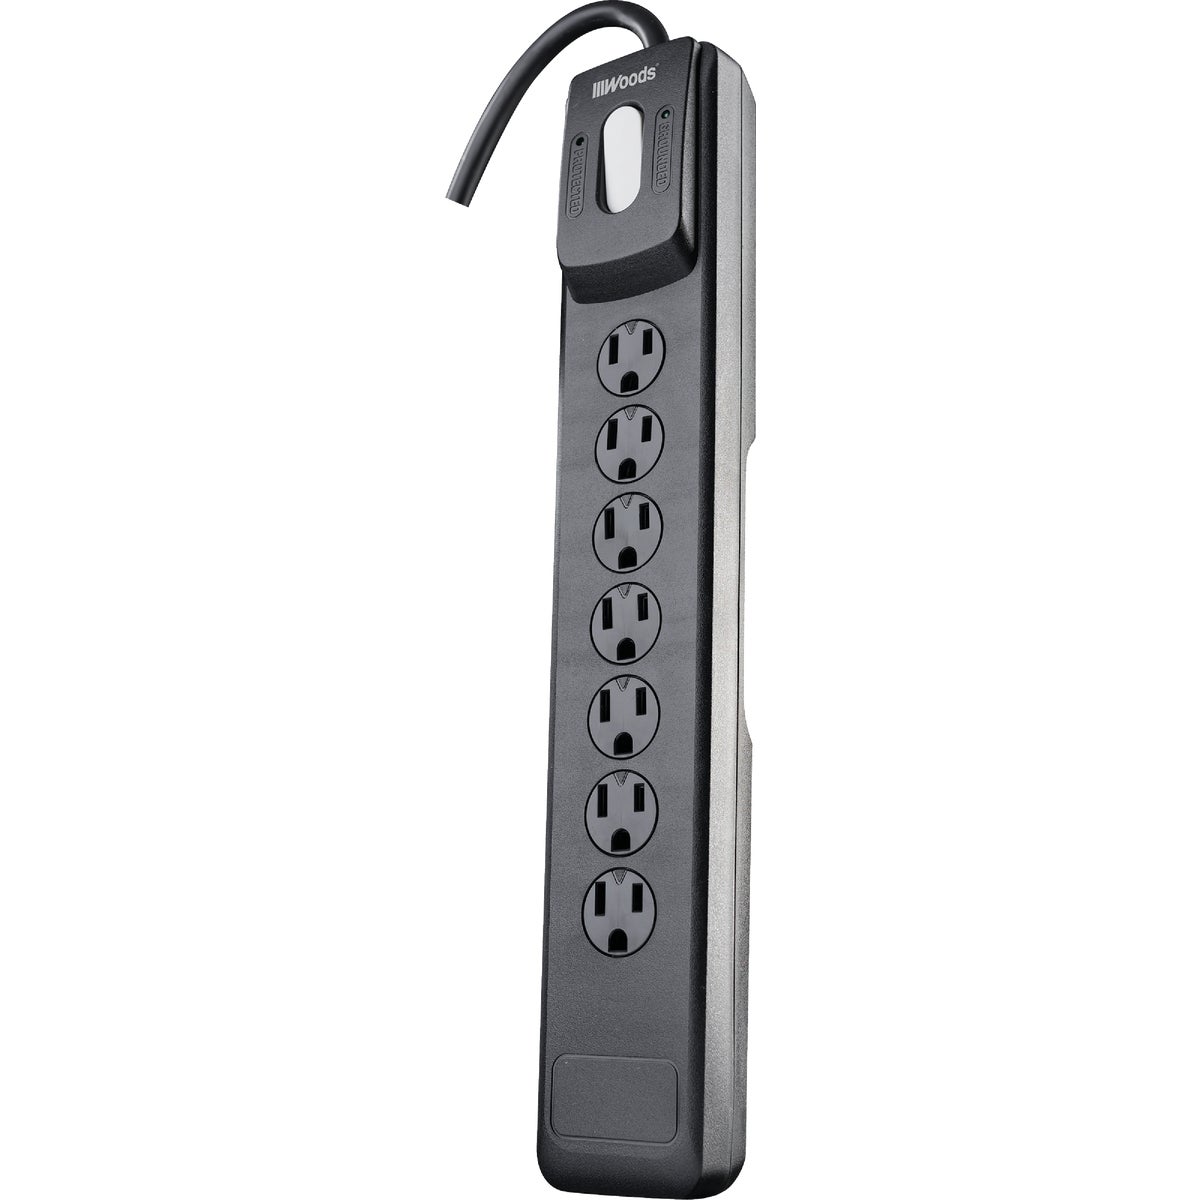 Item 502770, Surge protector strip with safety overload feature, flat plug style, and 